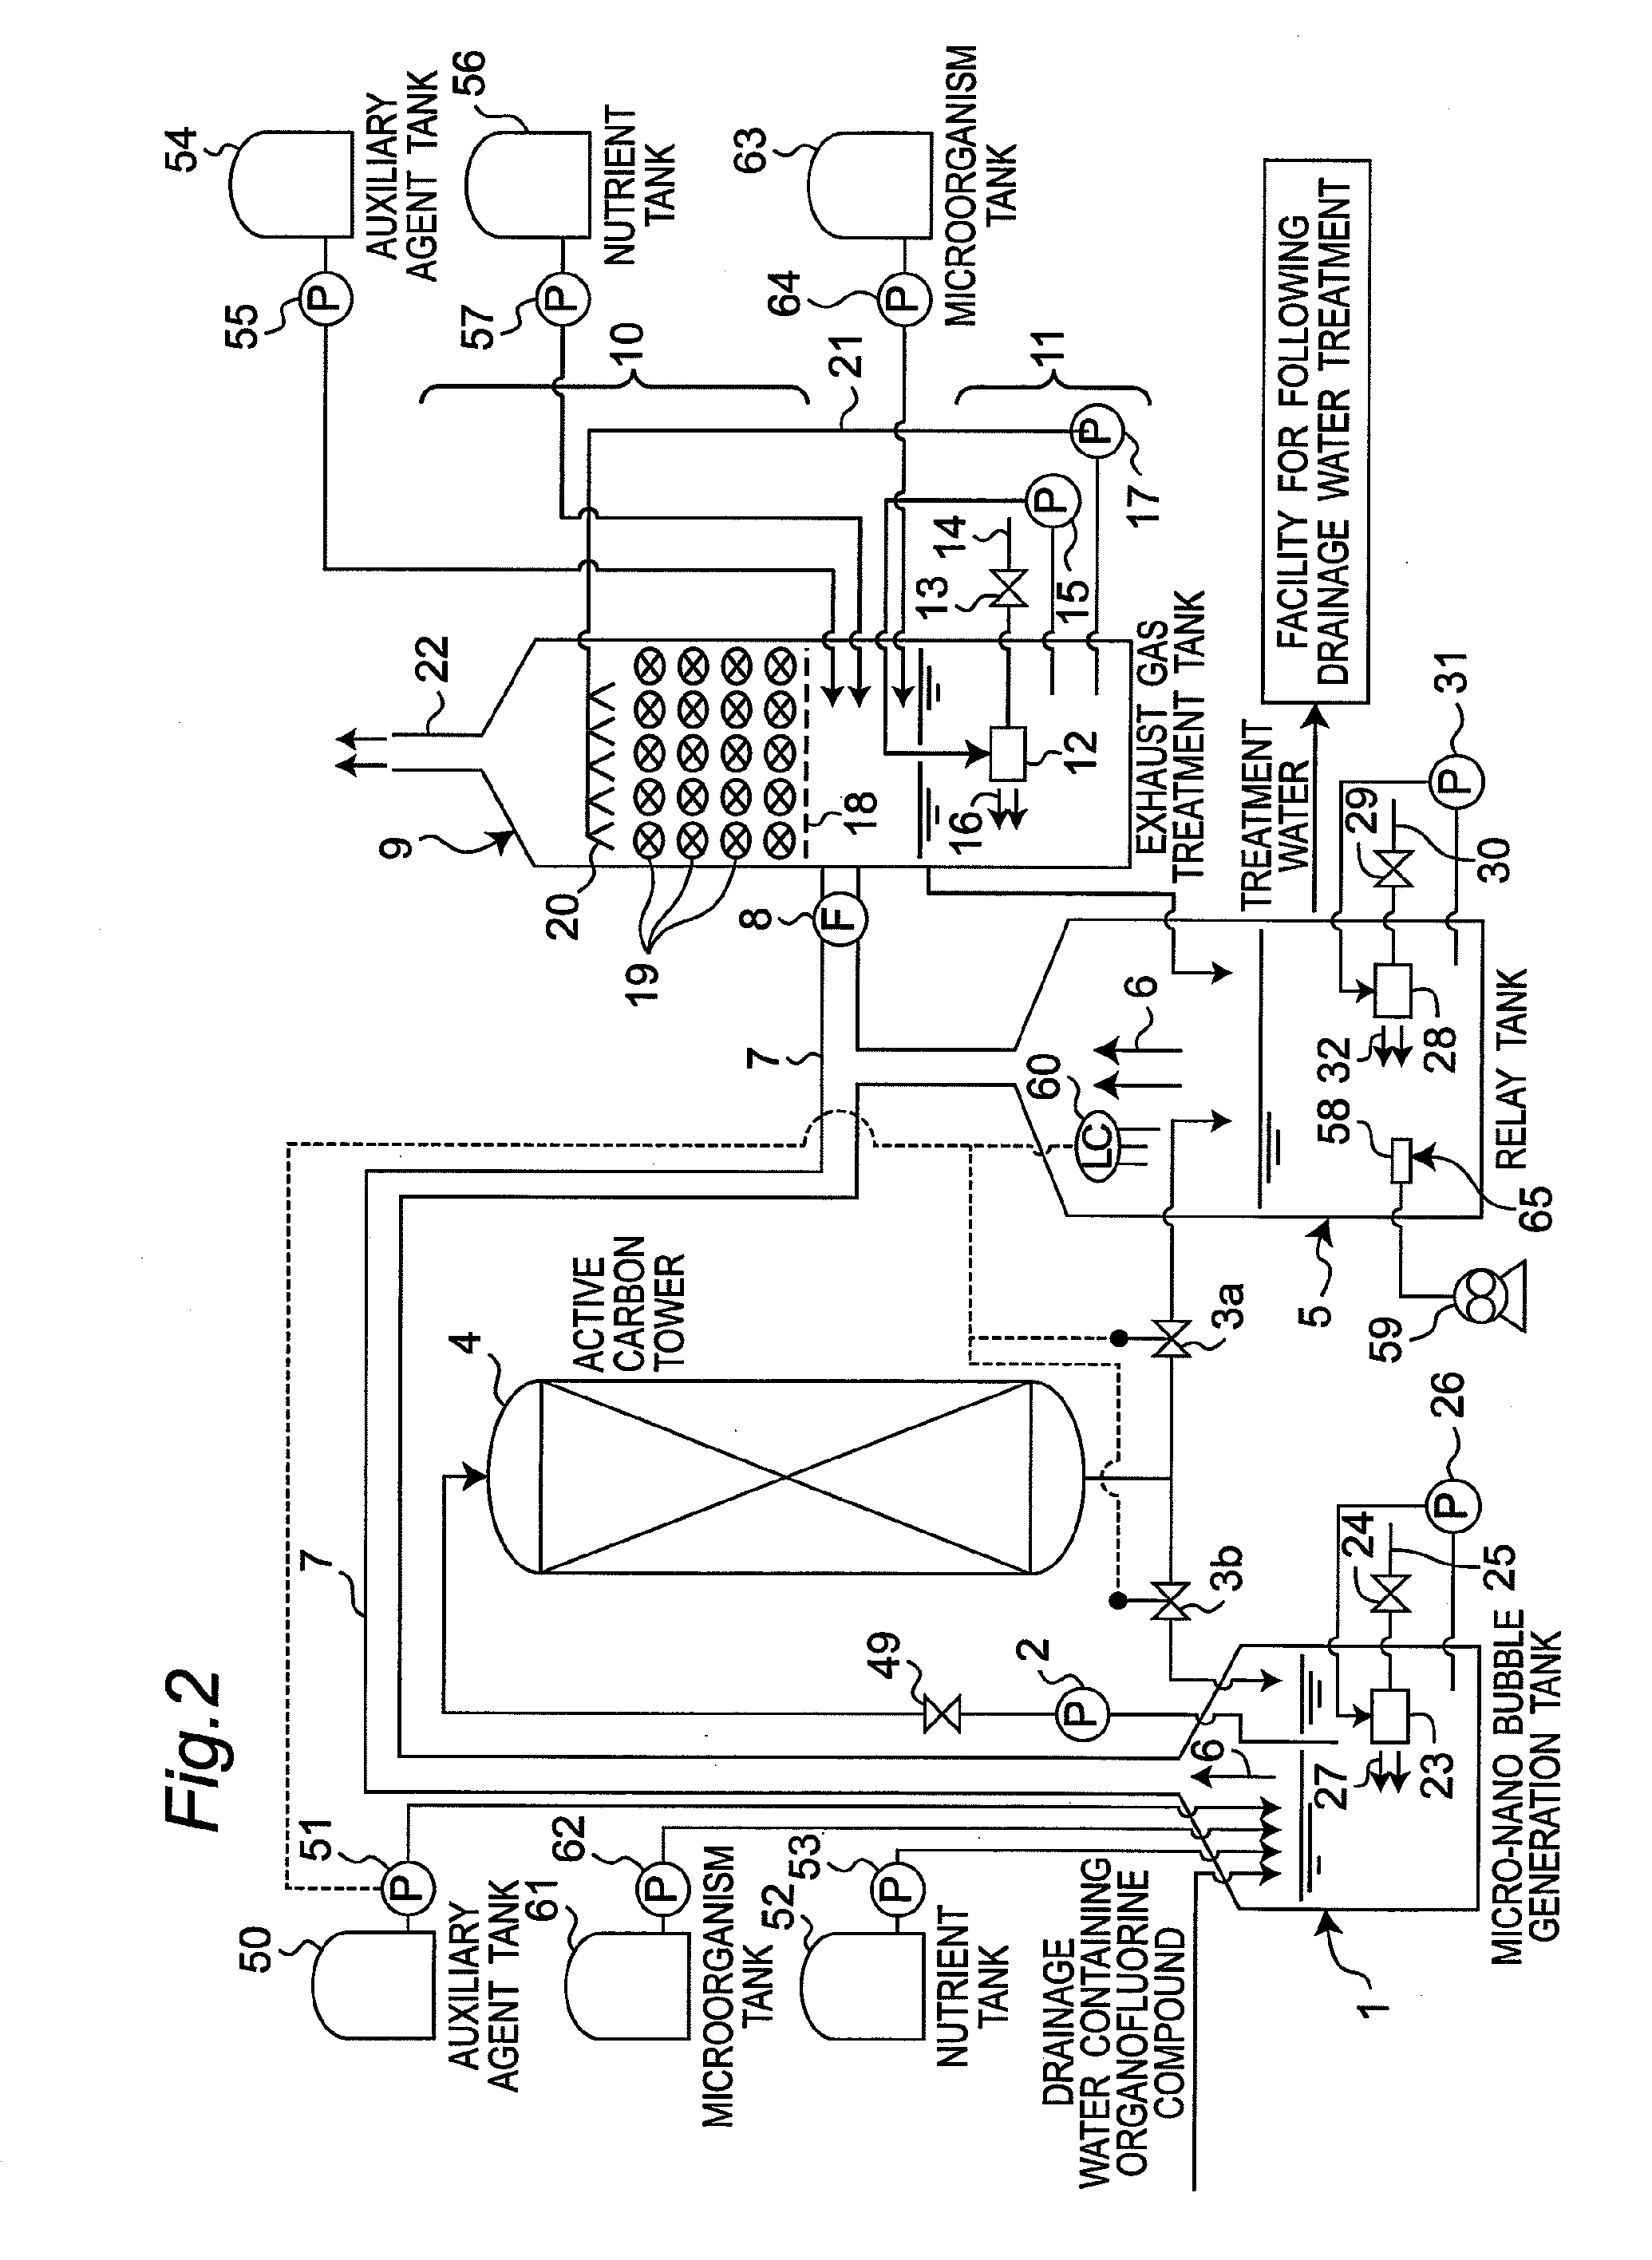 Drainage water-treating method and drainage water-treating apparatus